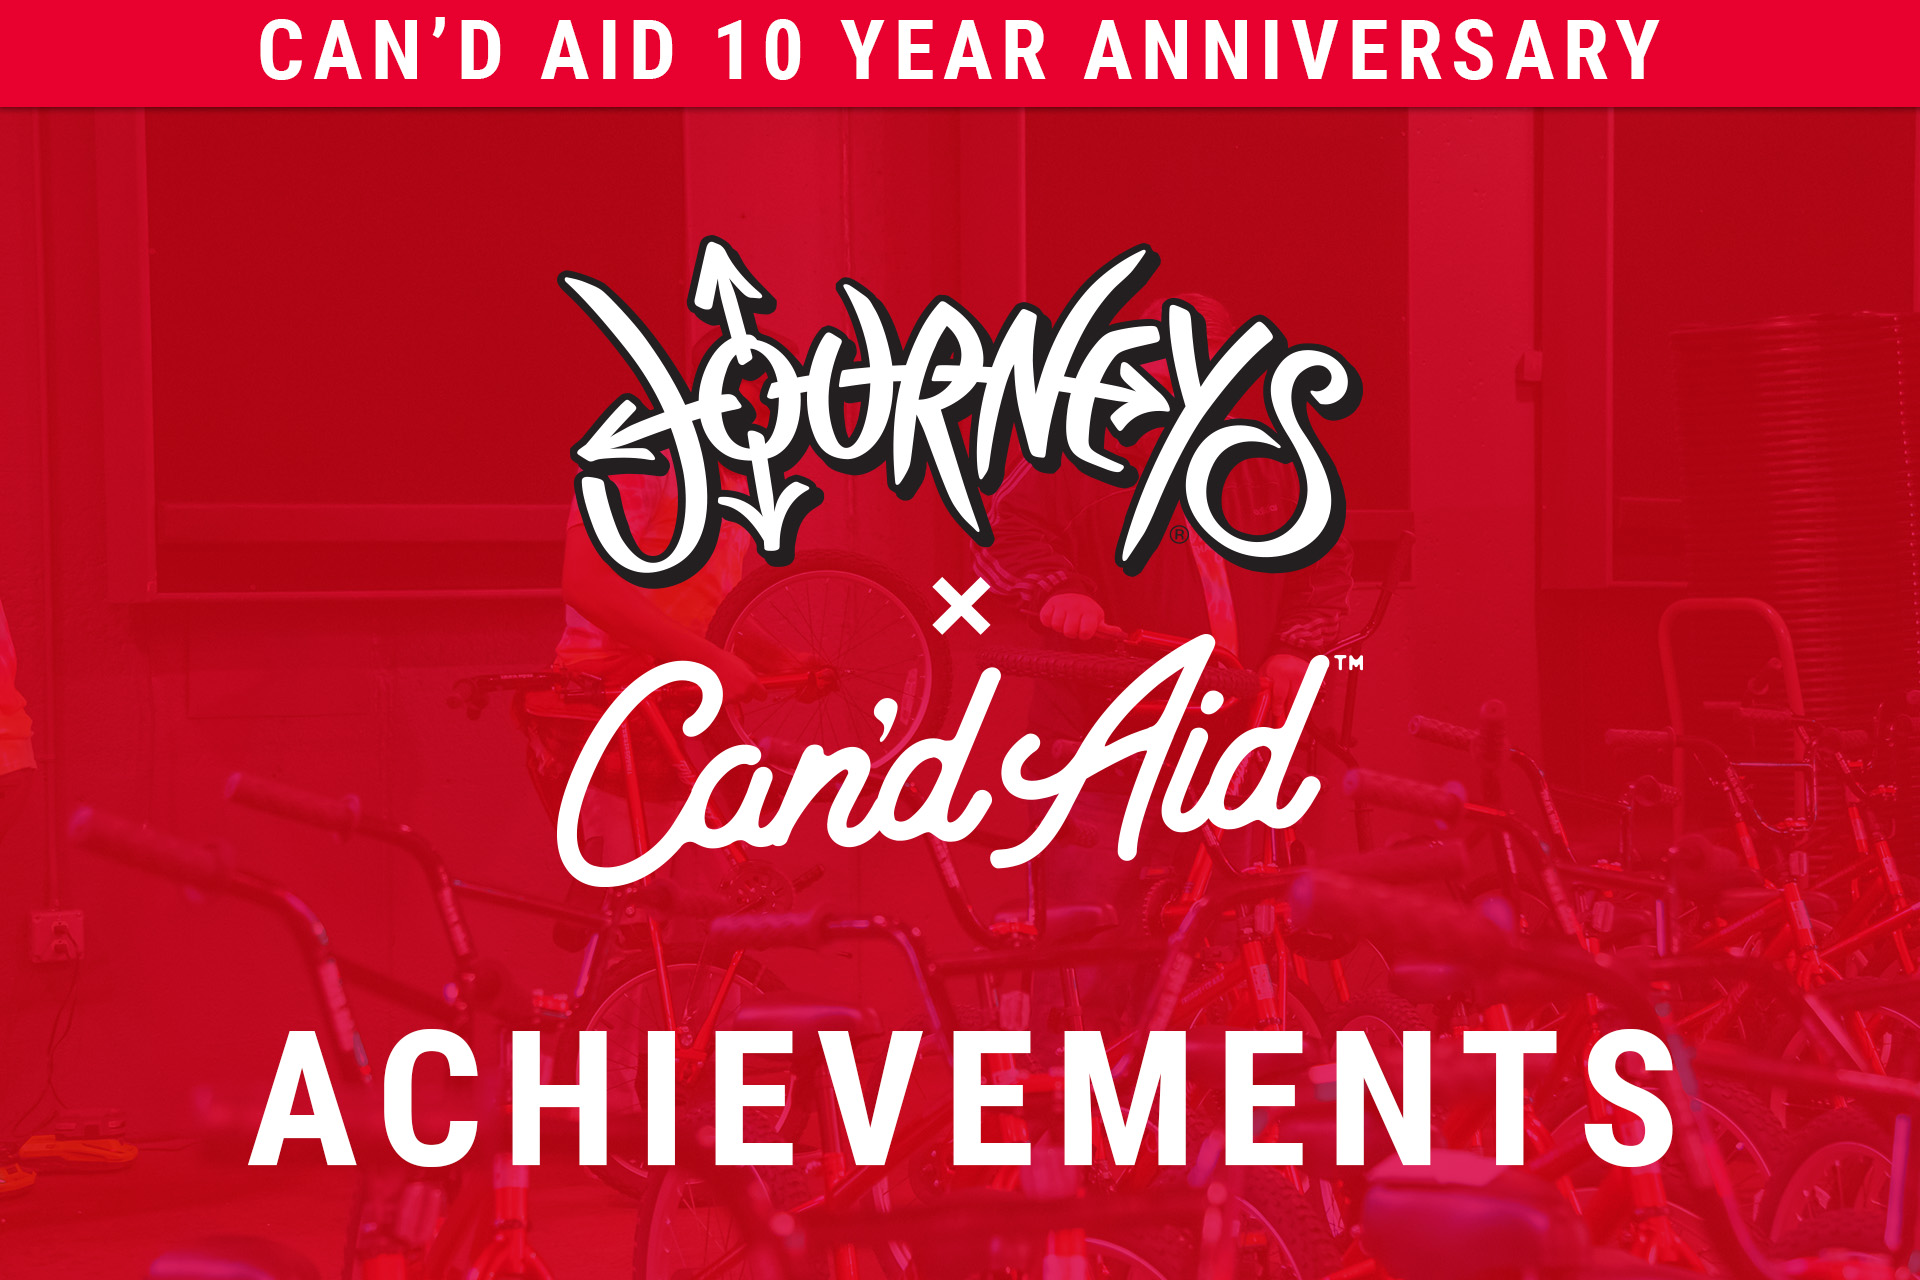 Read More About how Journeys is celebrating Can'd Aid's 10 year Anniversary